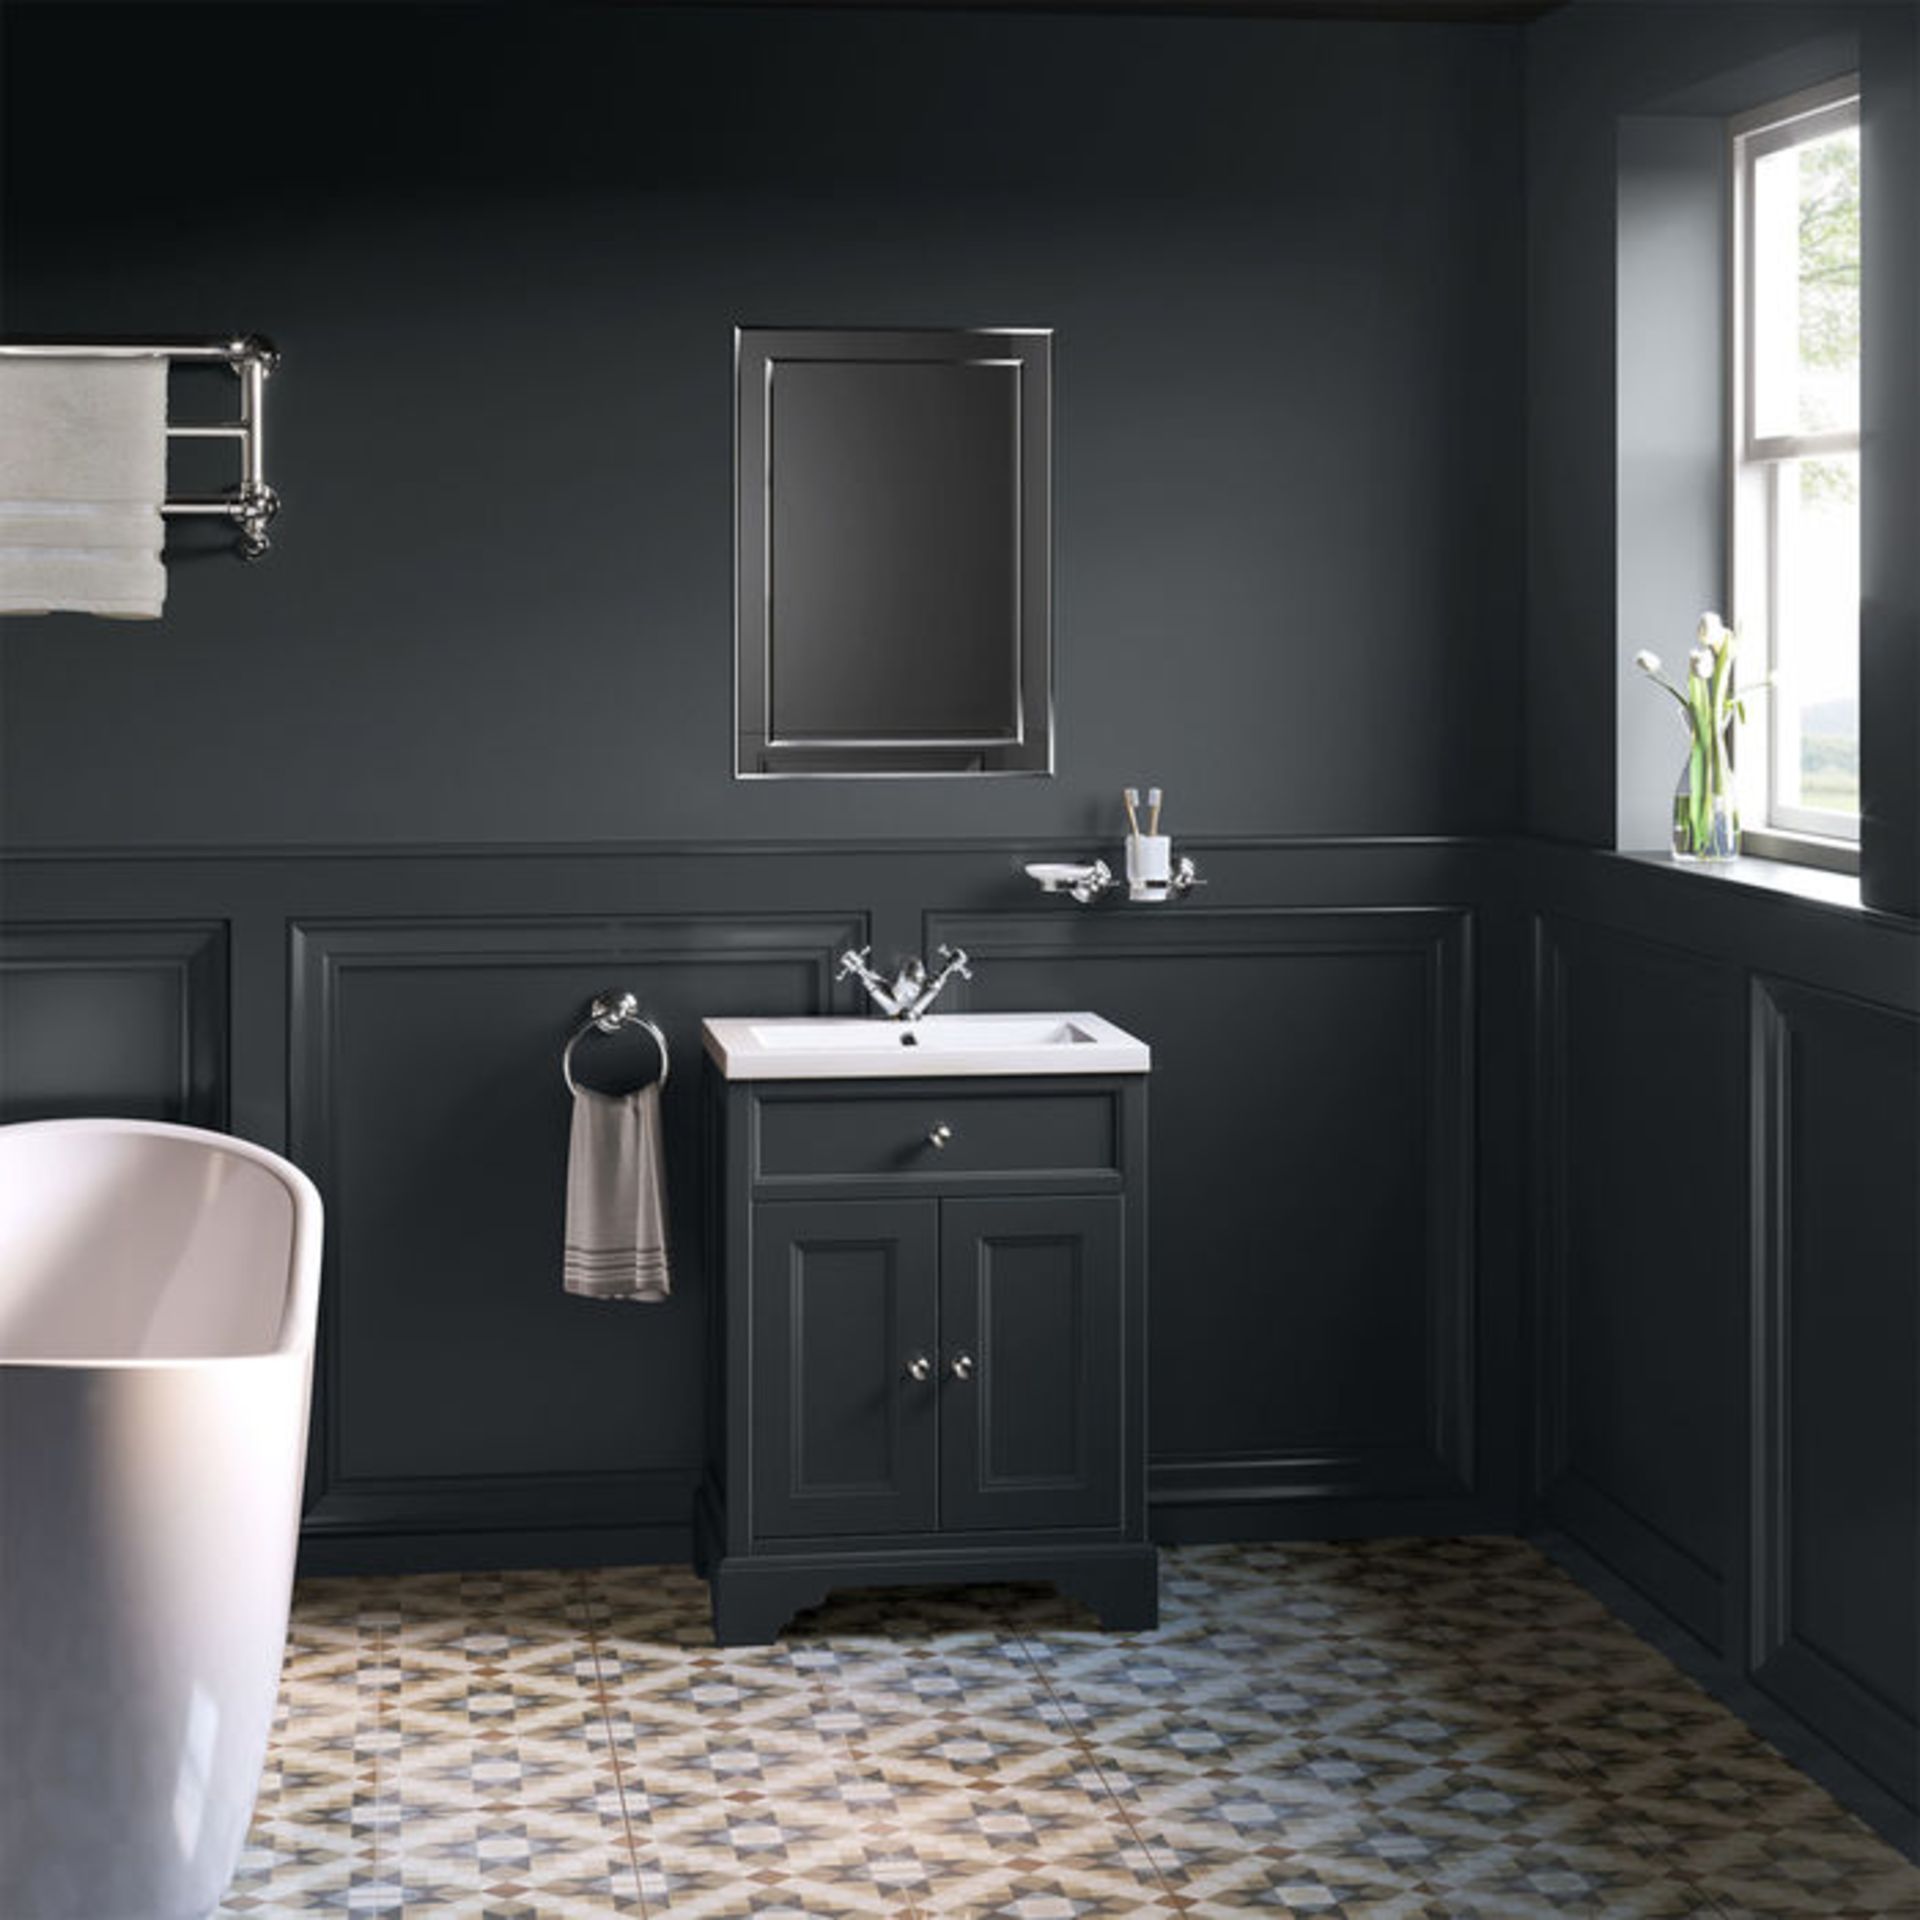 NEW & BOXED 600mm Loxley Charcoal Vanity Unit - Floor Standing. RRP £1,074.99.MF9002.Stunning... - Image 2 of 3